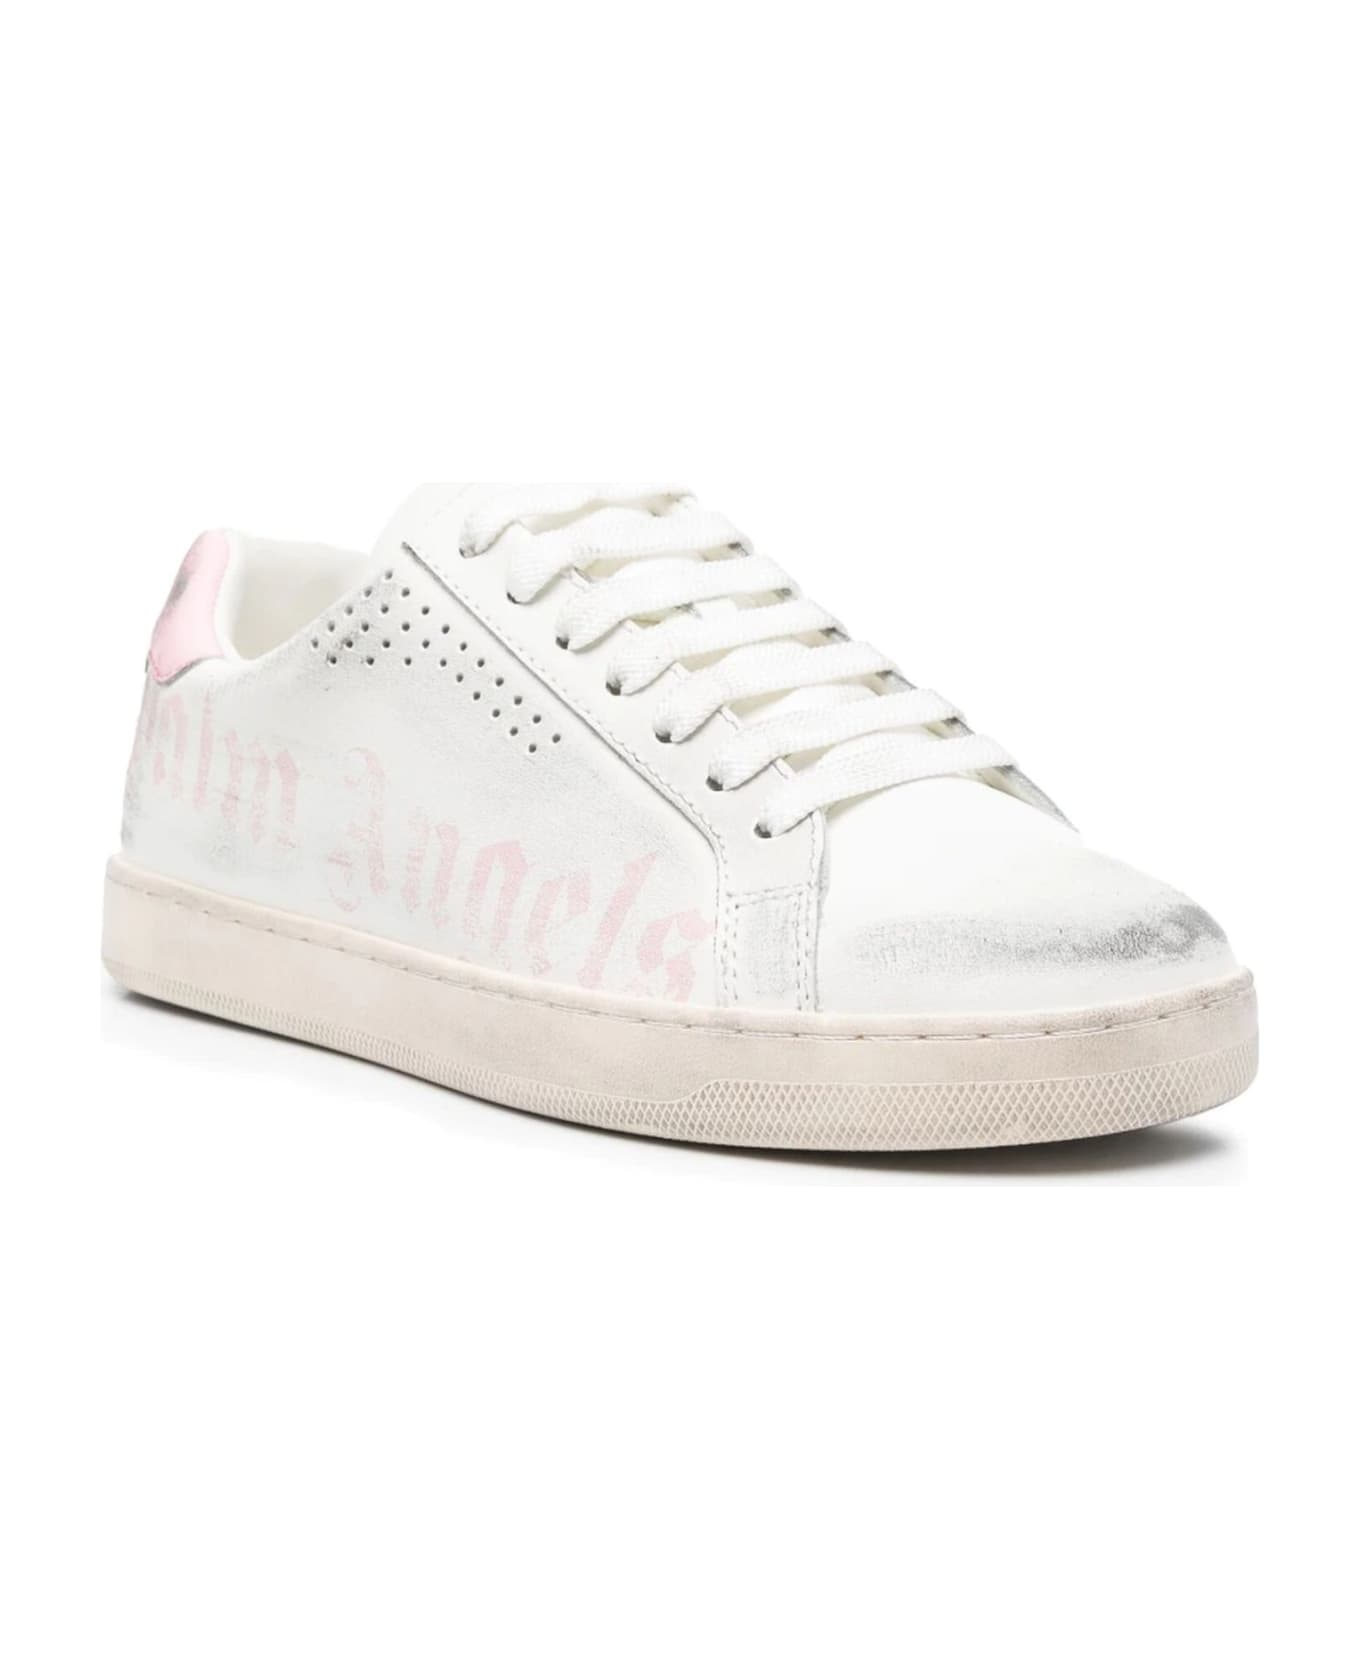 Palm Angels Logo Printed Distressed Lace-up Sneakers - Bianco+rosa